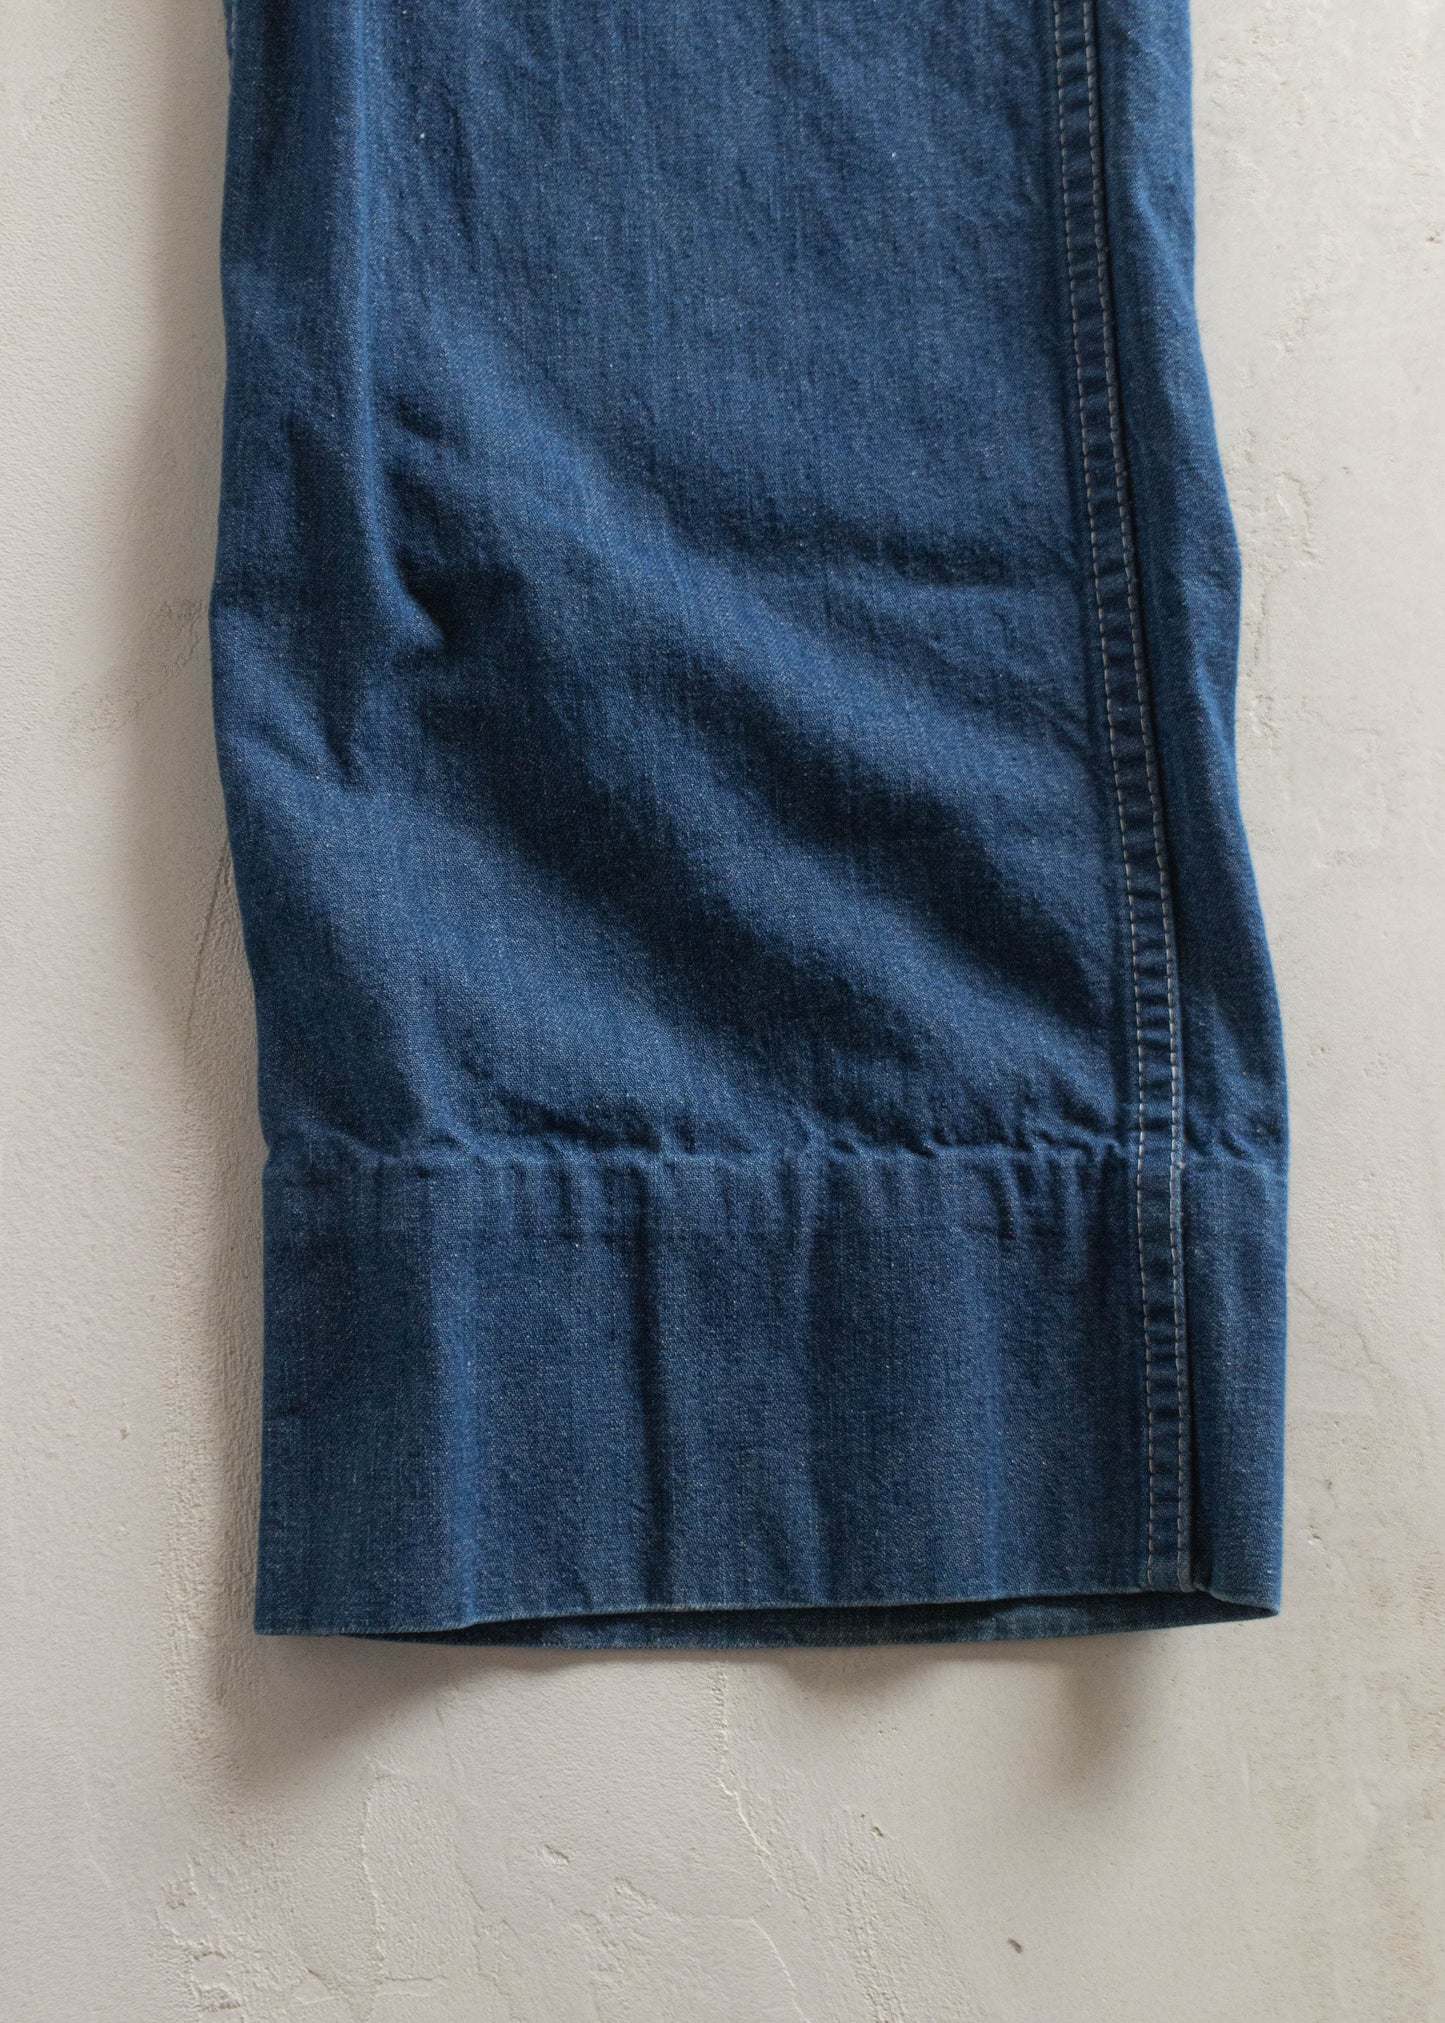 Vintage 1980s Time & Place Denim Short Sleeve Coveralls Size 2XS/XS